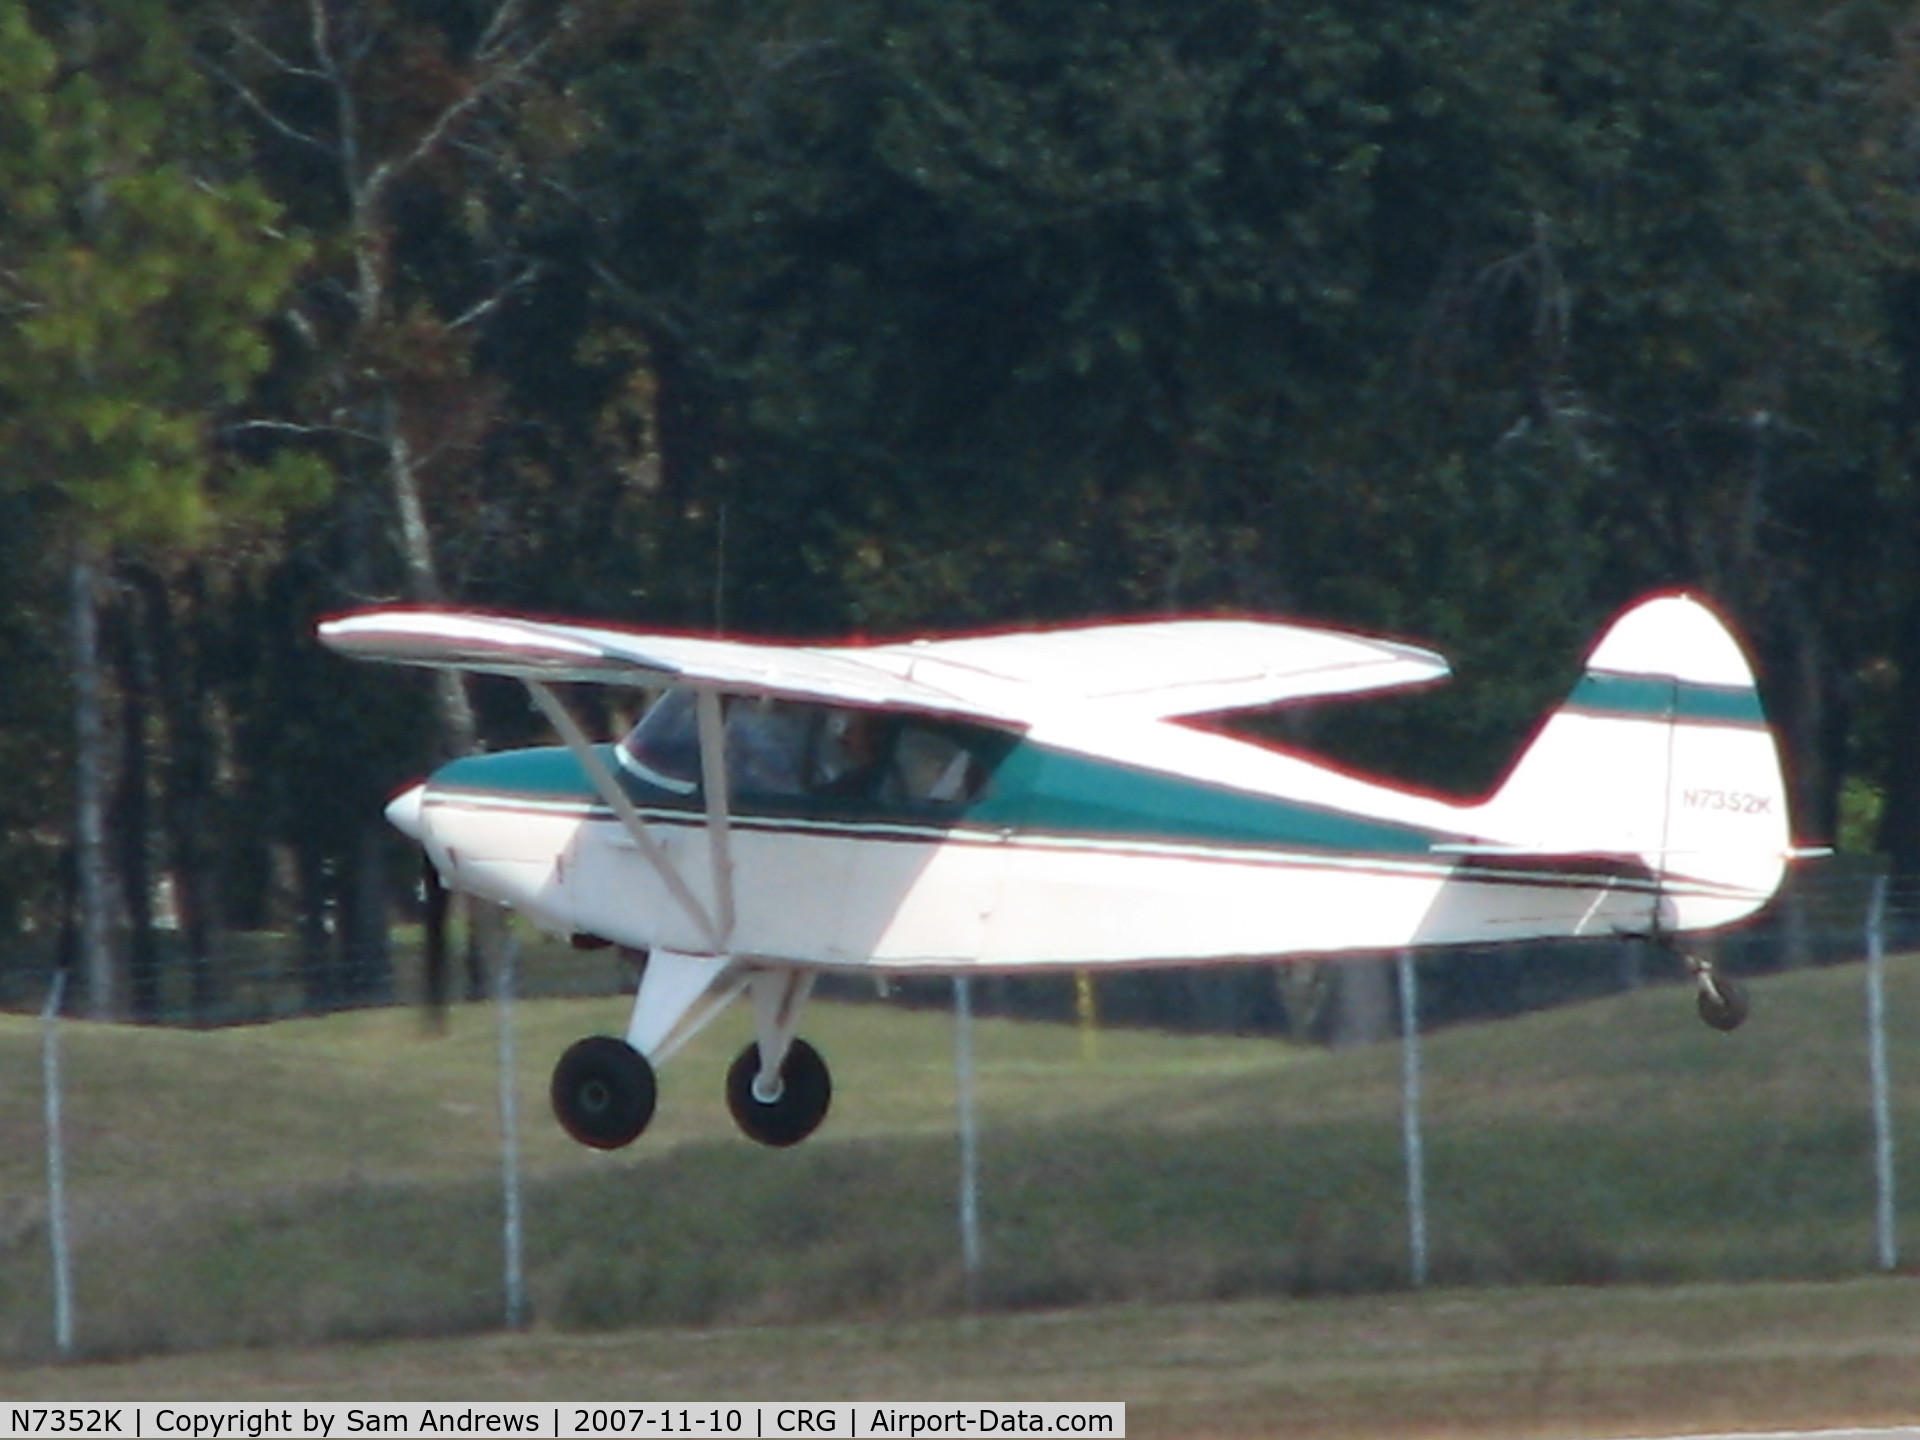 N7352K, 1950 Piper PA-20 Pacer C/N 20-260, Just took off at CRG